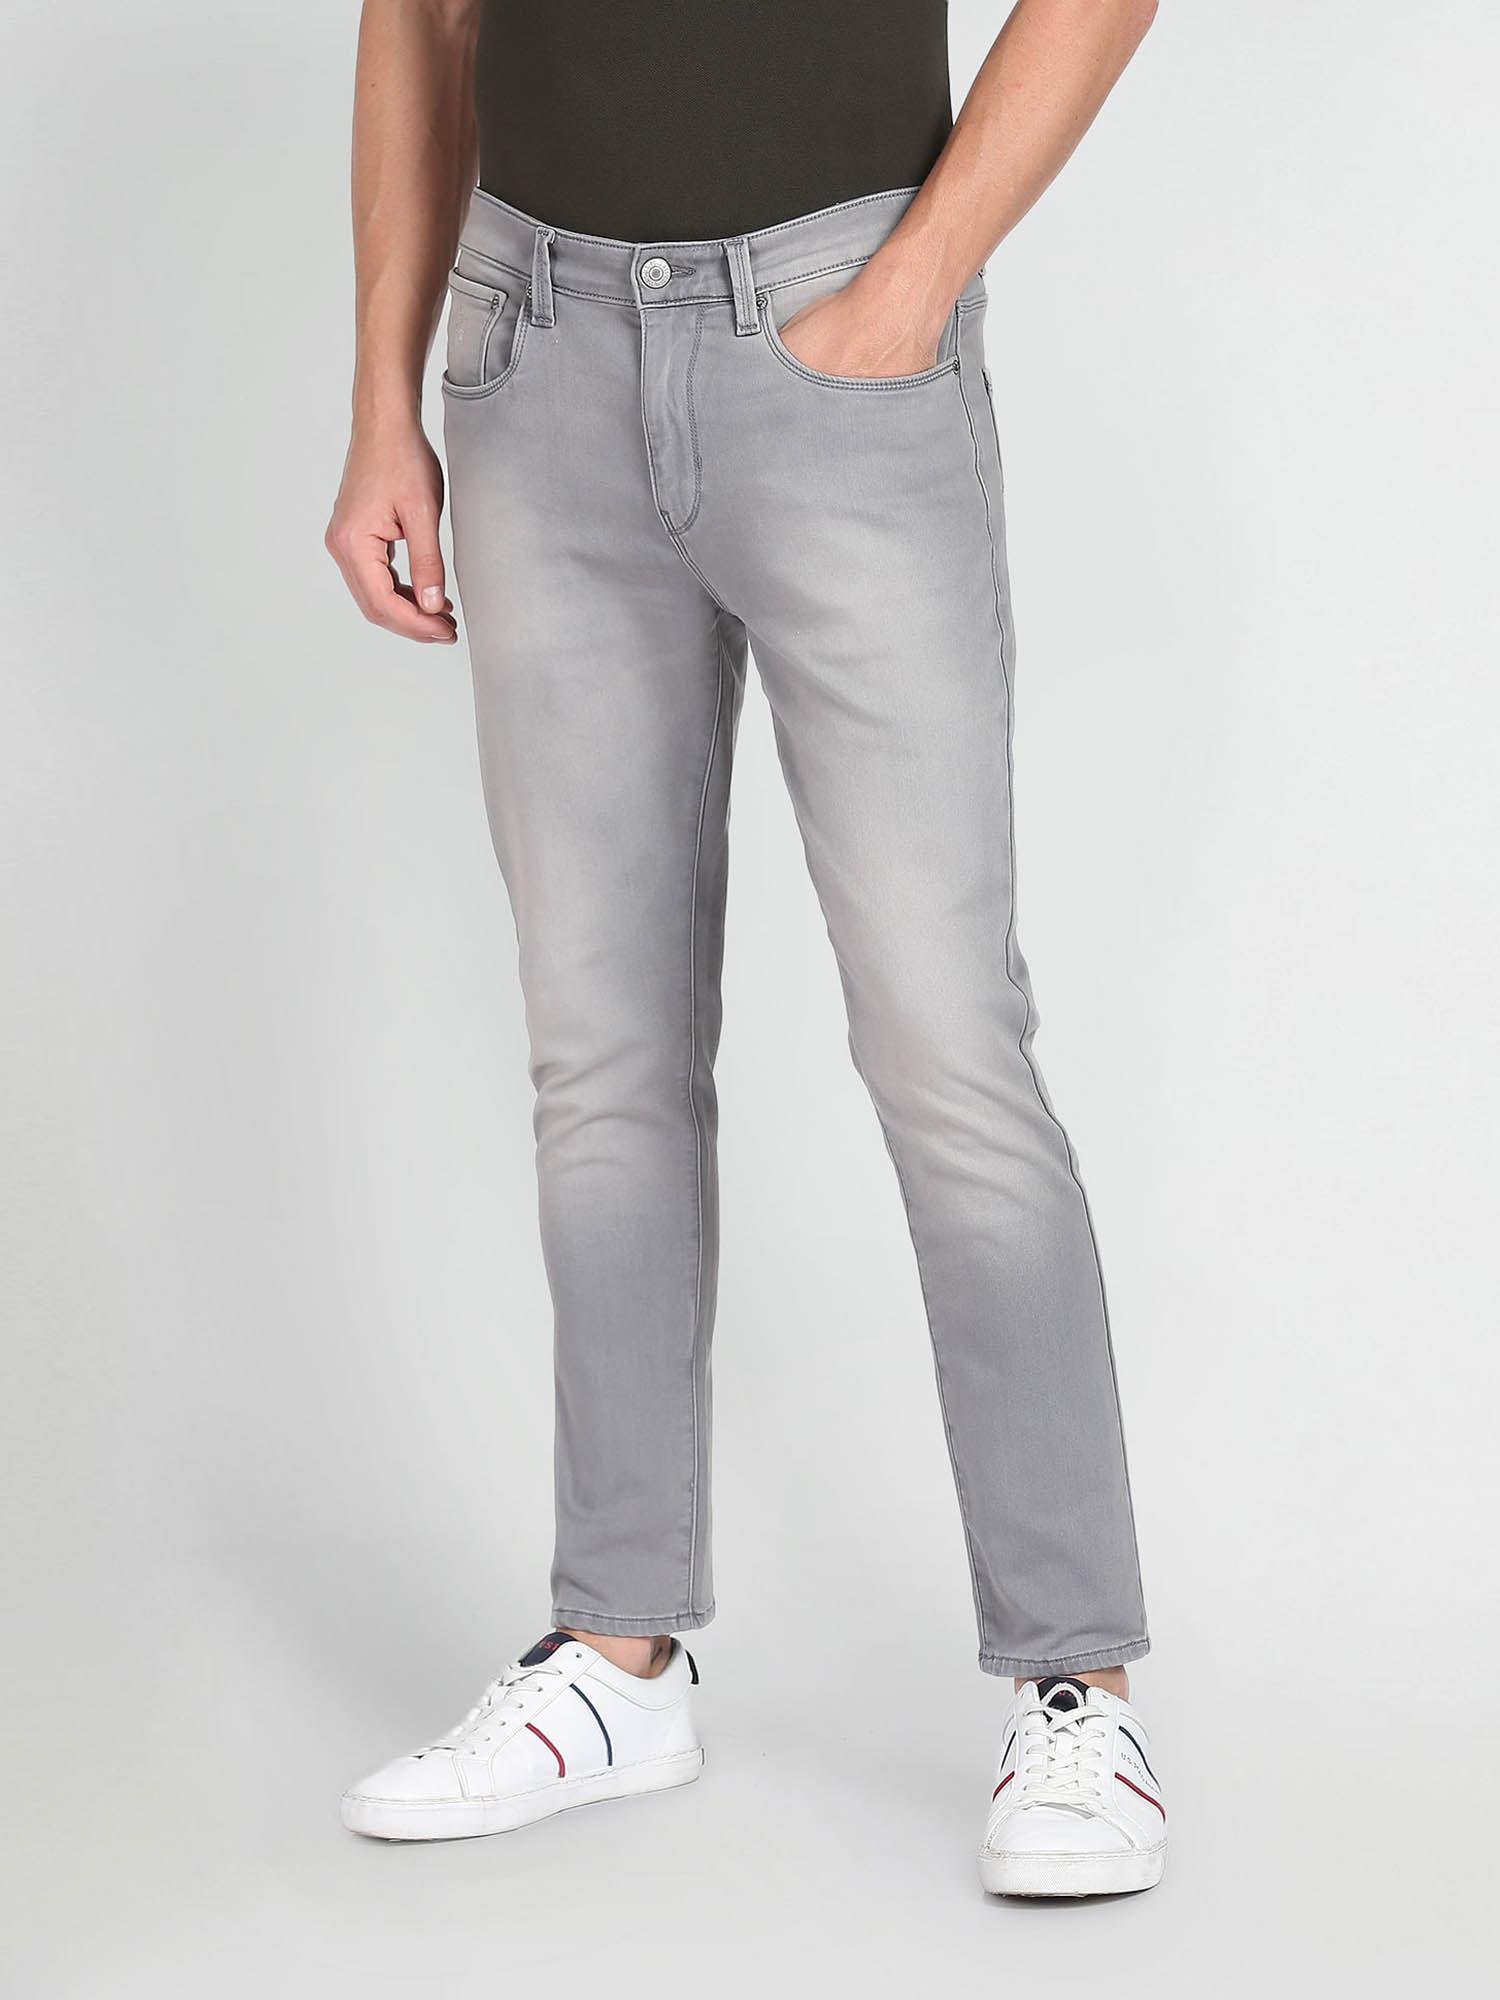 henry cropped stone wash jeans